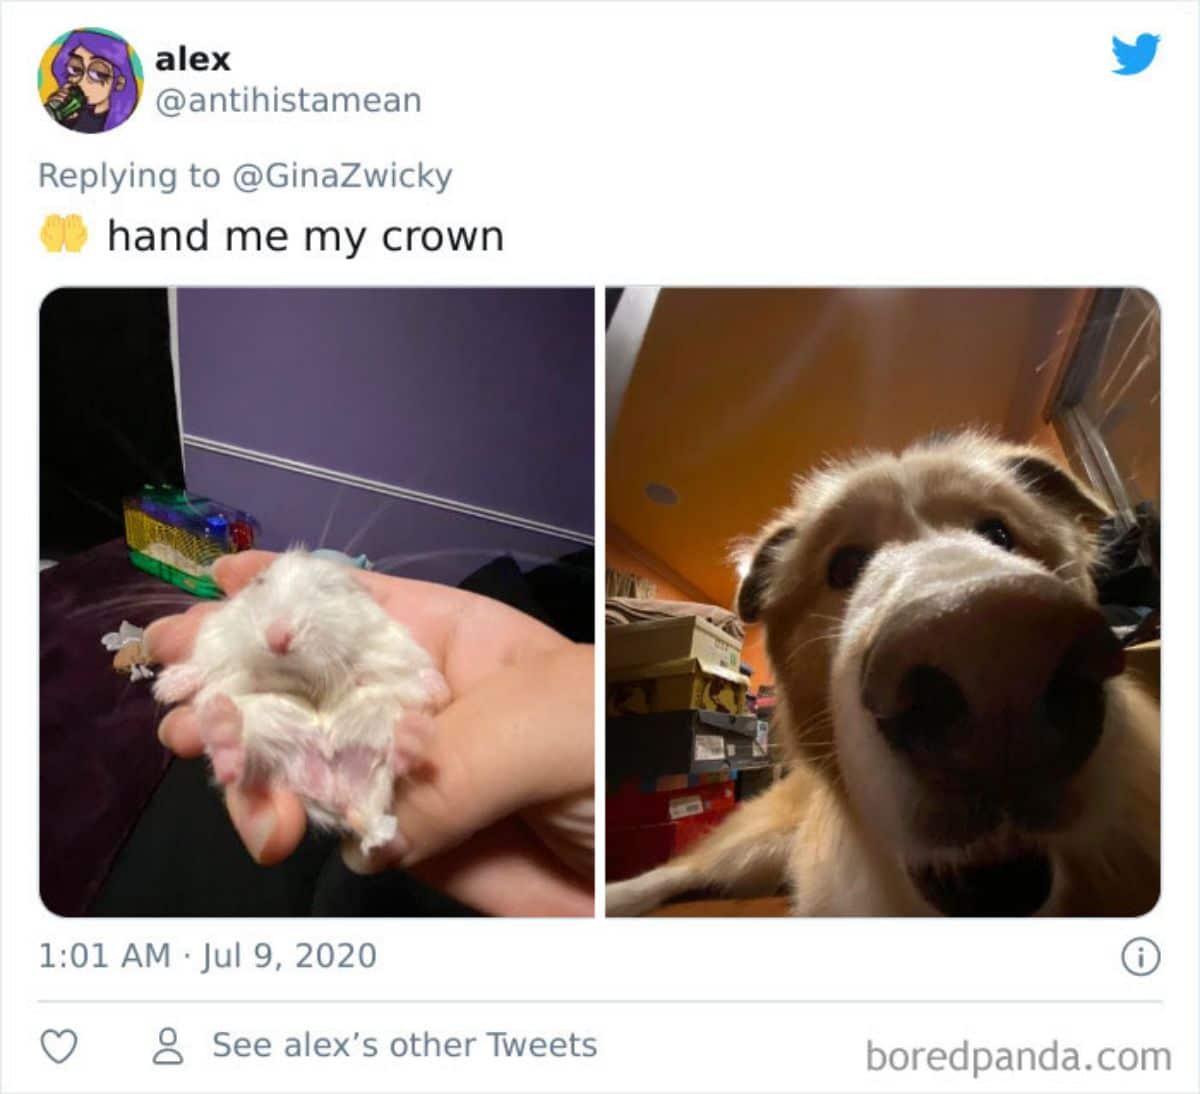 tweet of a white hamster being held in a hand and a close up of a brown and white dog's face